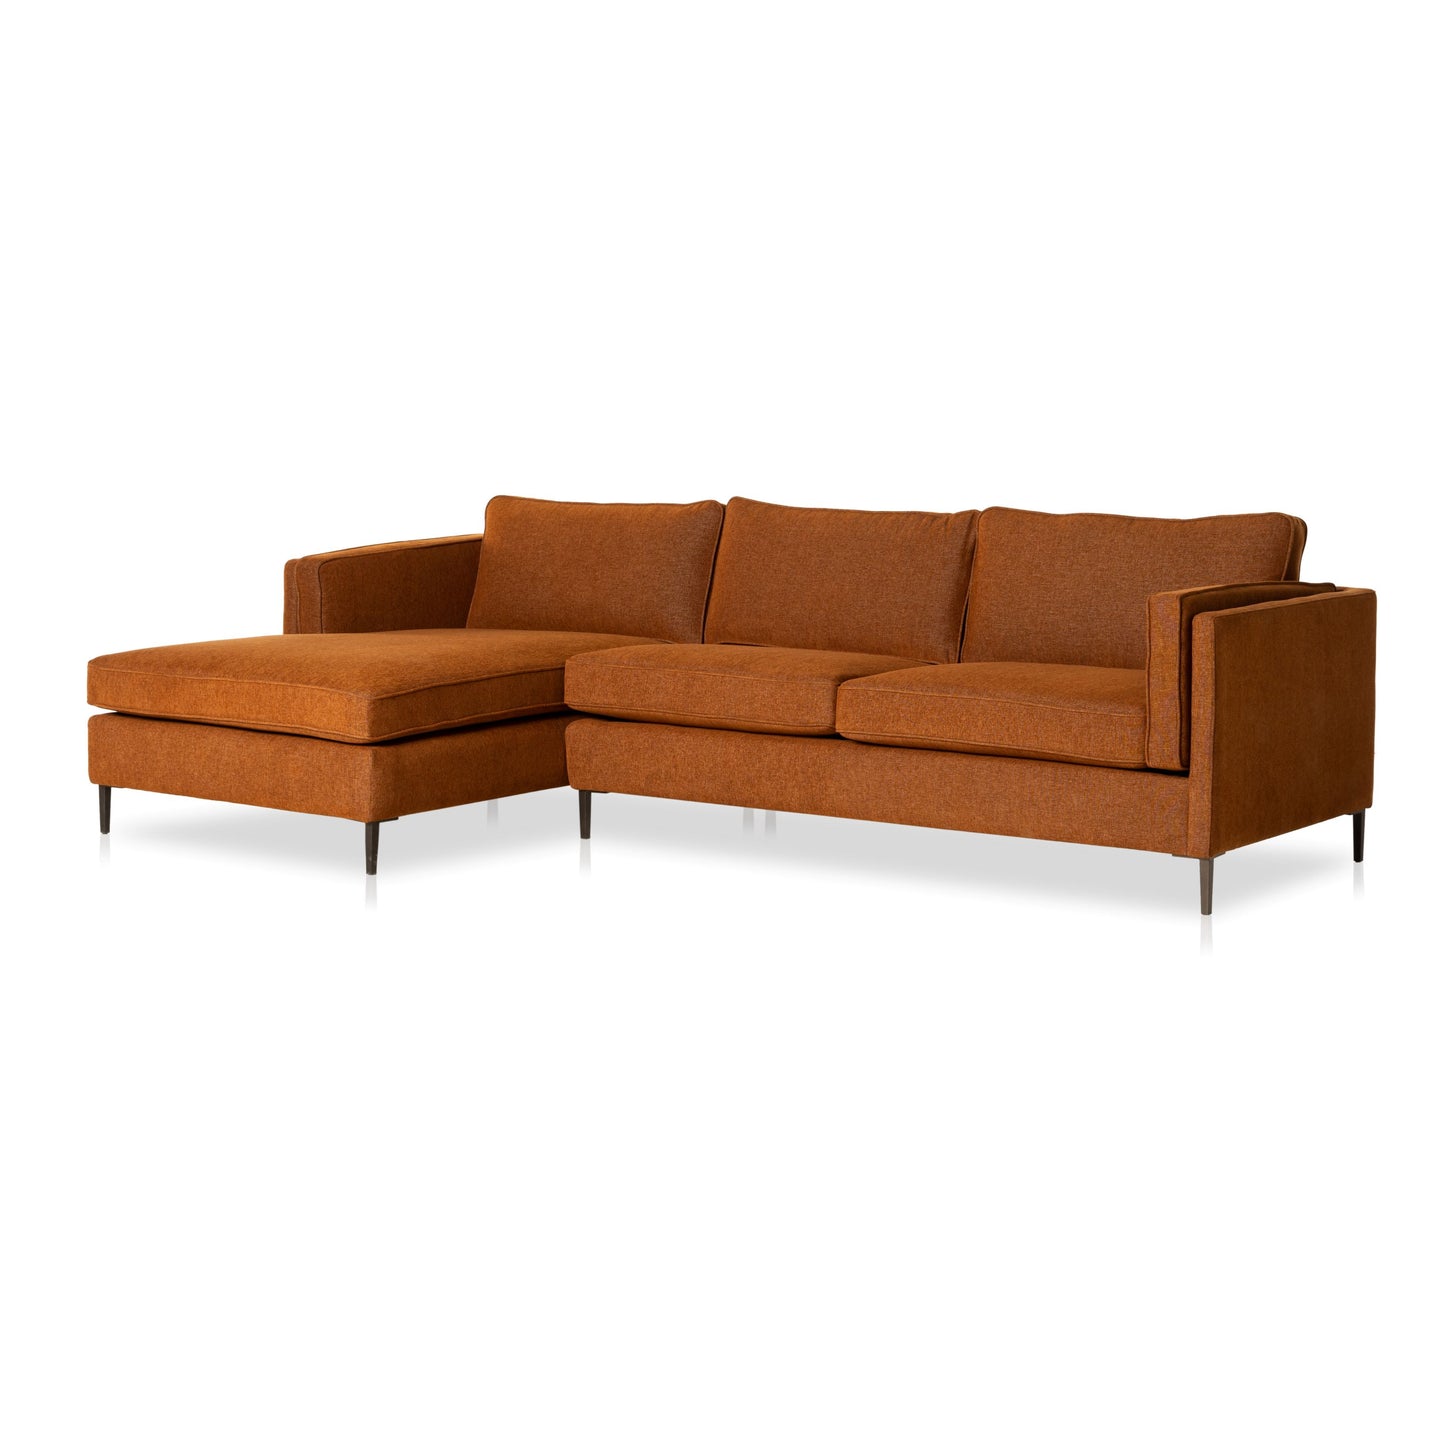 Load image into Gallery viewer, Emery 2pc Sectional Sutton Rust / Left FacingSectiona Sofa Four Hands  Sutton Rust Left Facing  Four Hands, Mid Century Modern Furniture, Old Bones Furniture Company, Old Bones Co, Modern Mid Century, Designer Furniture, https://www.oldbonesco.com/
